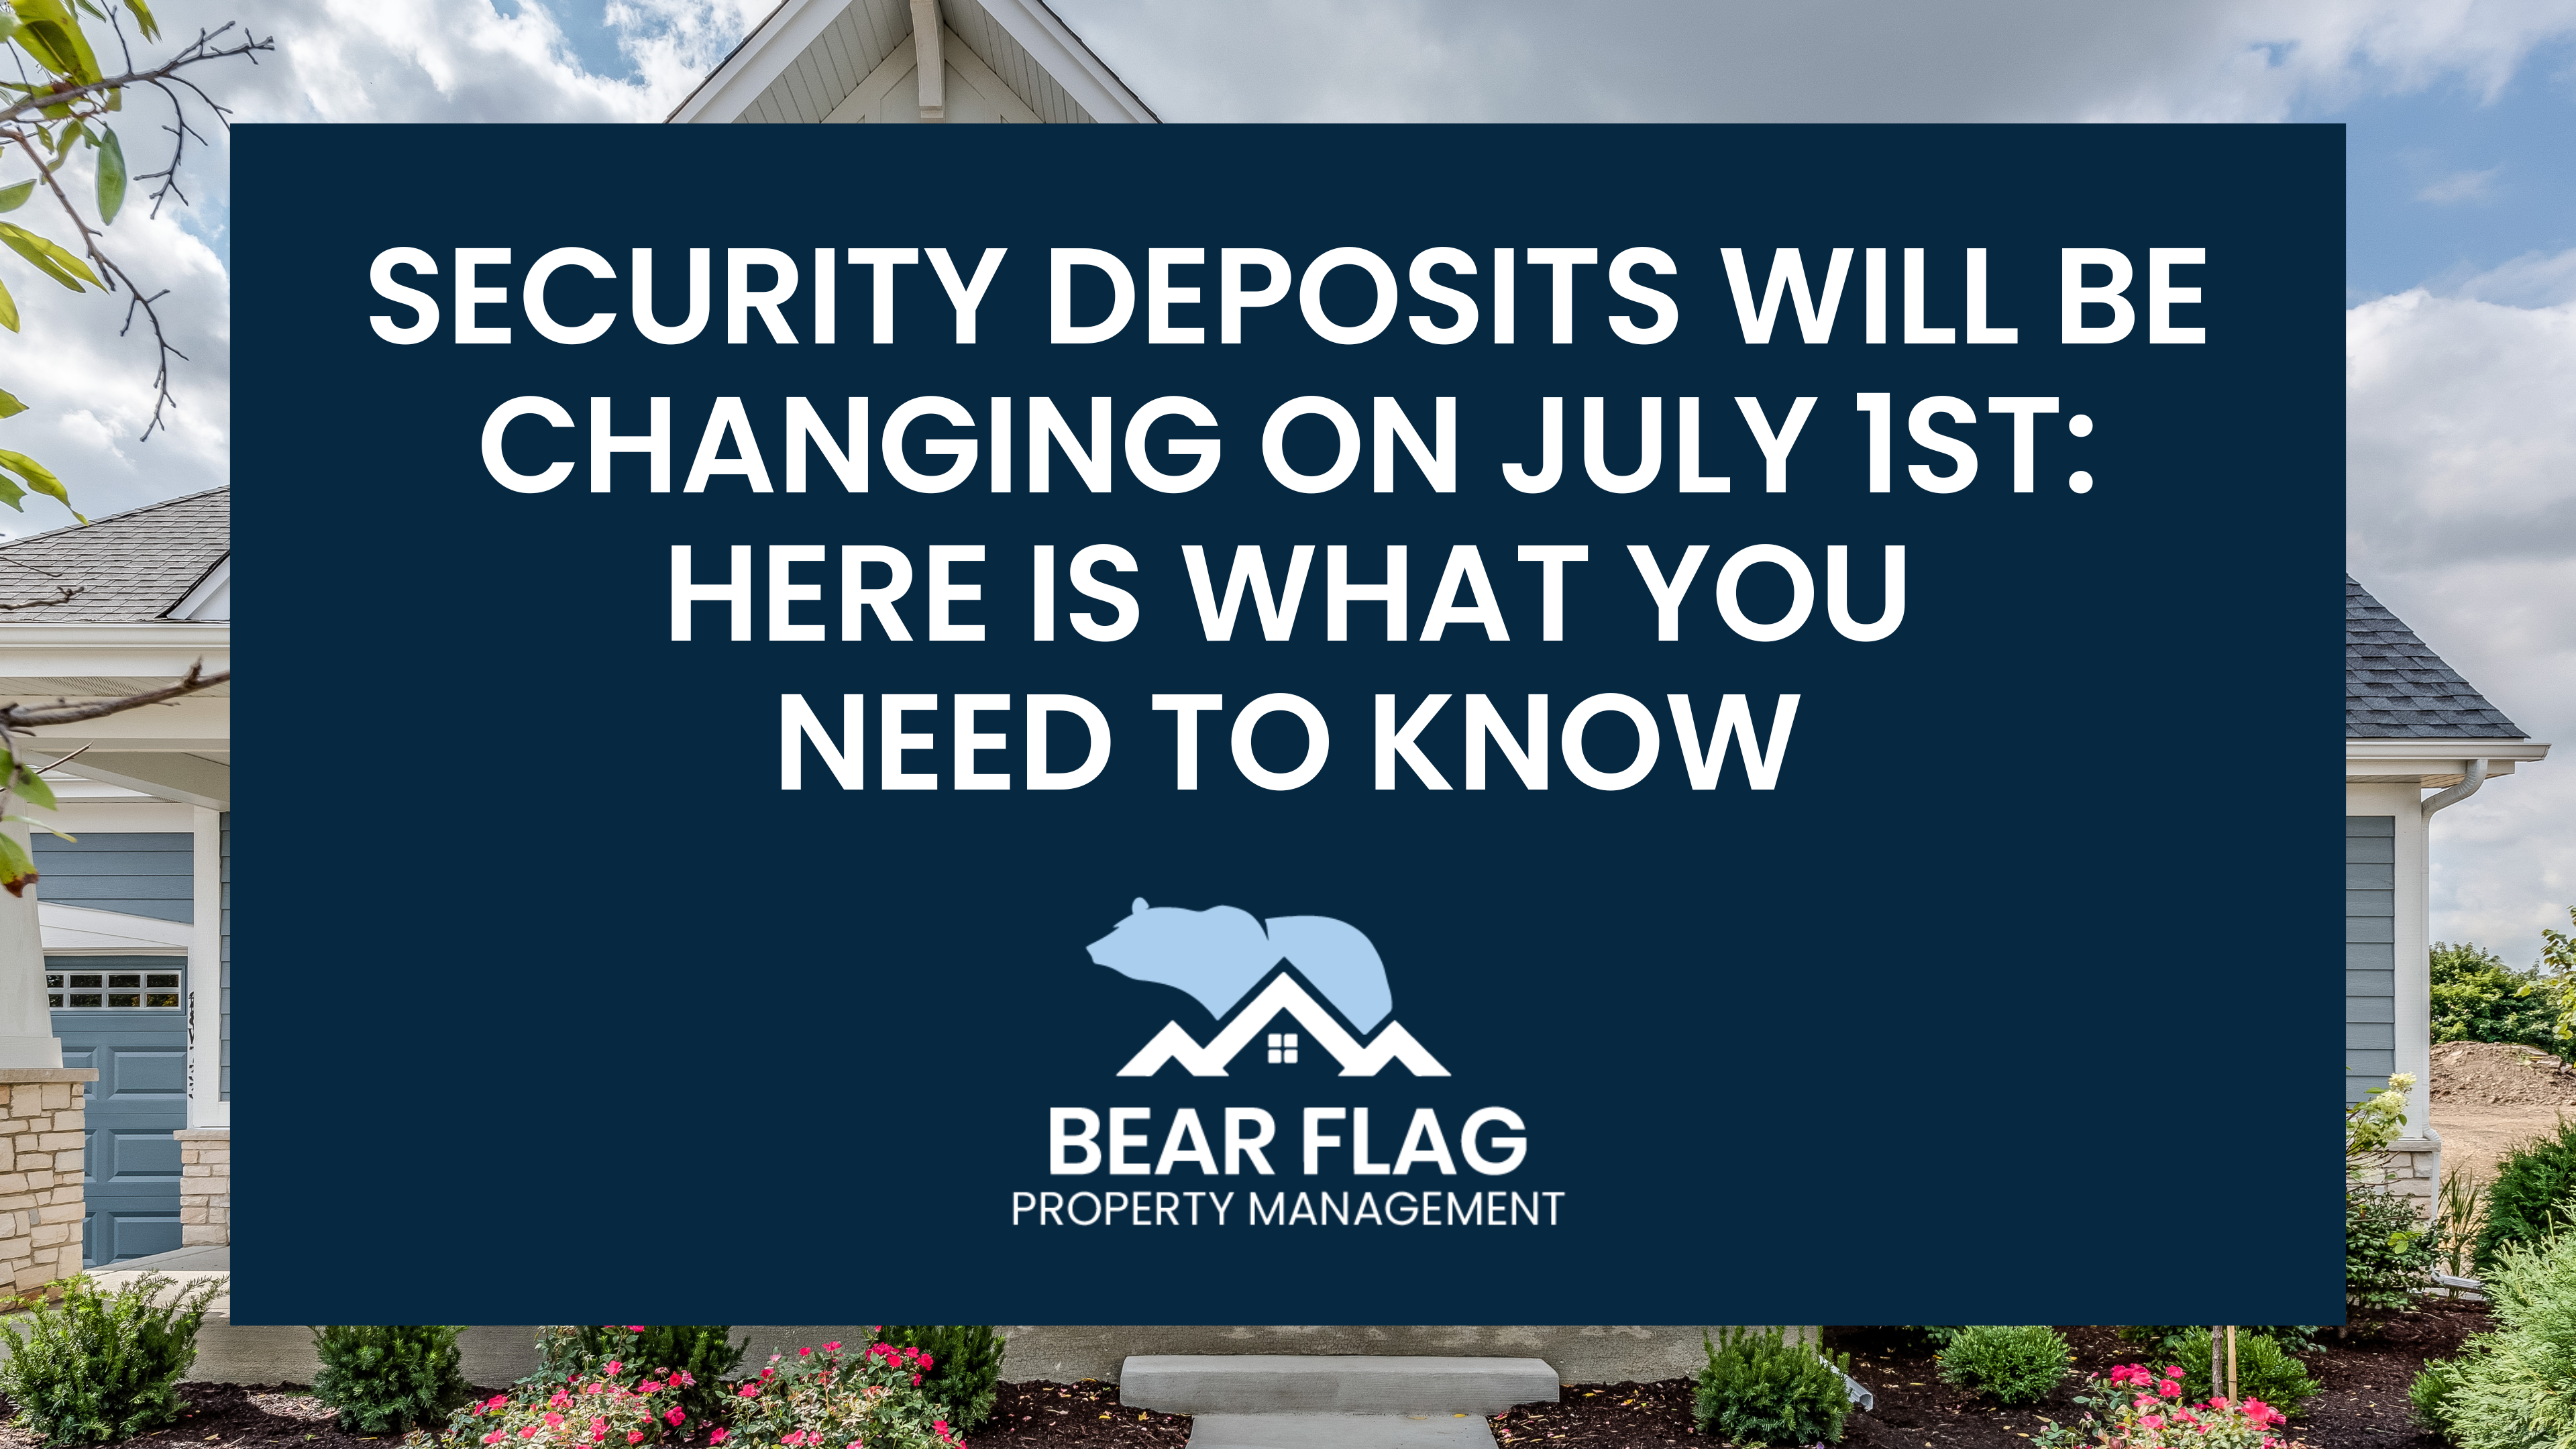 SECURITY DEPOSITS WILL BE CHANGING ON JULY 1ST: HERE IS WHAT YOU NEED TO KNOW